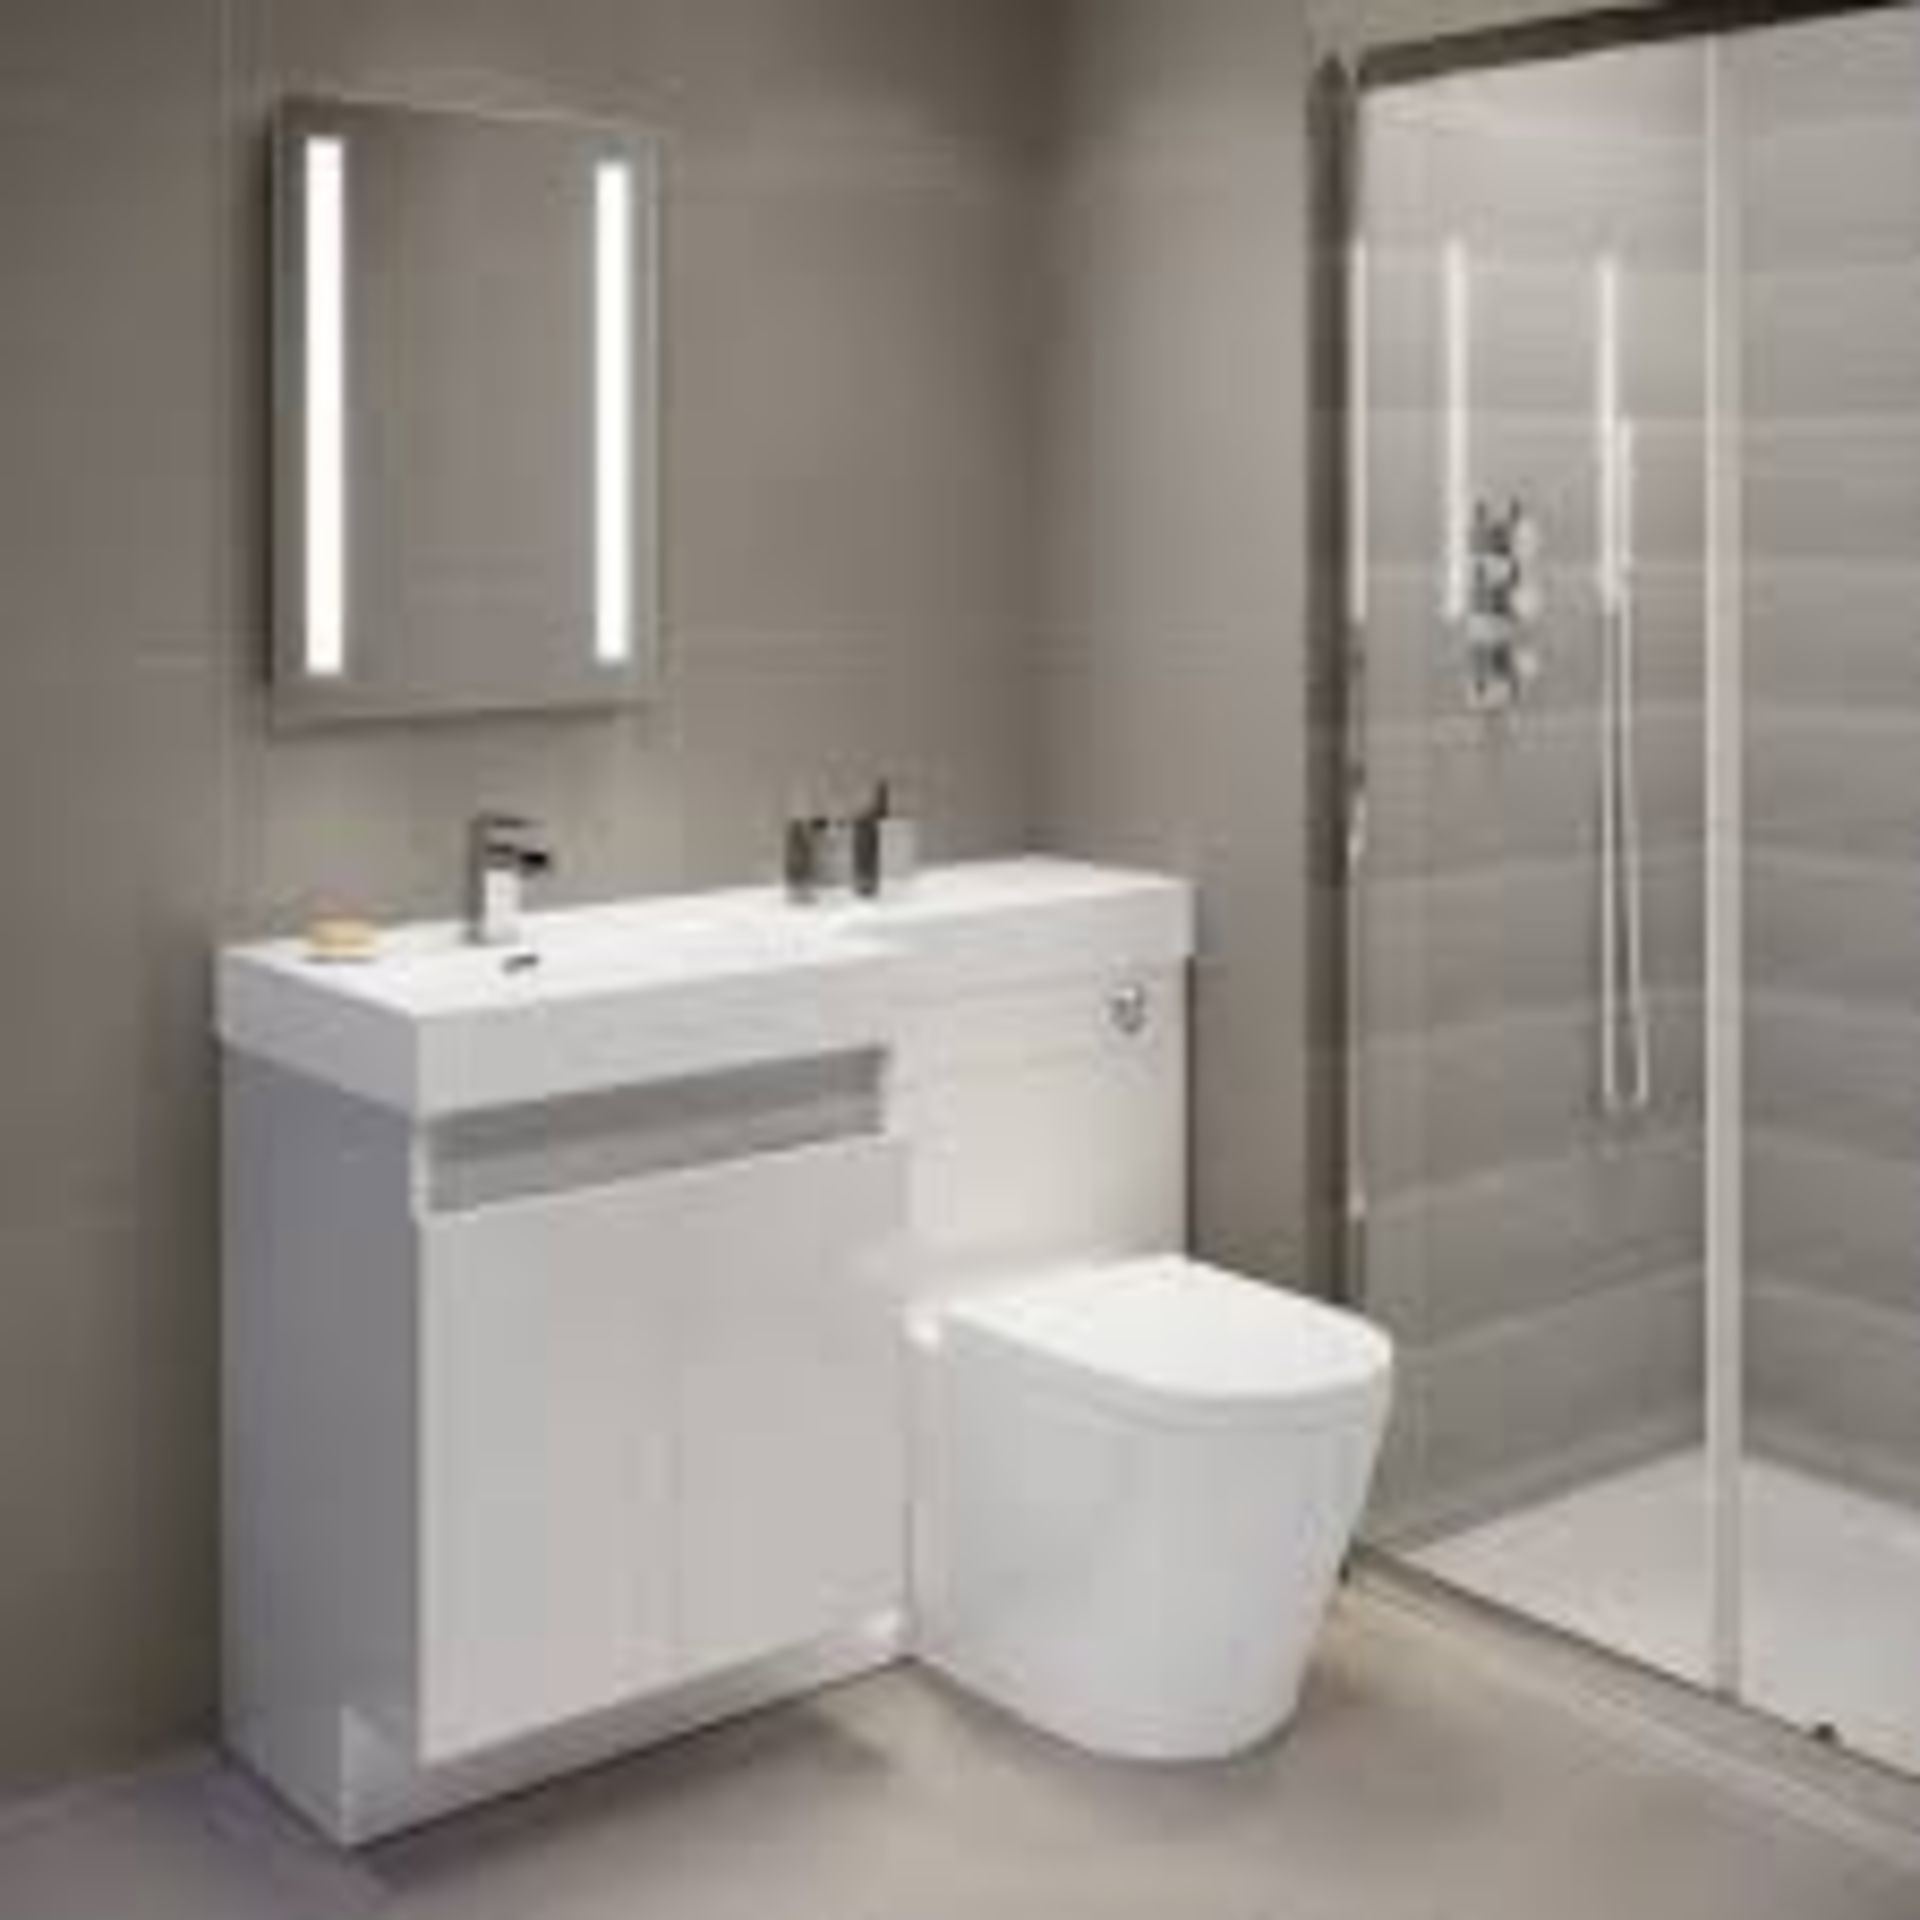 (J120) 500x700mm Omega LED Mirror - Battery Operated. RRP £299.99. Energy saving controlled On / Off - Bild 4 aus 4